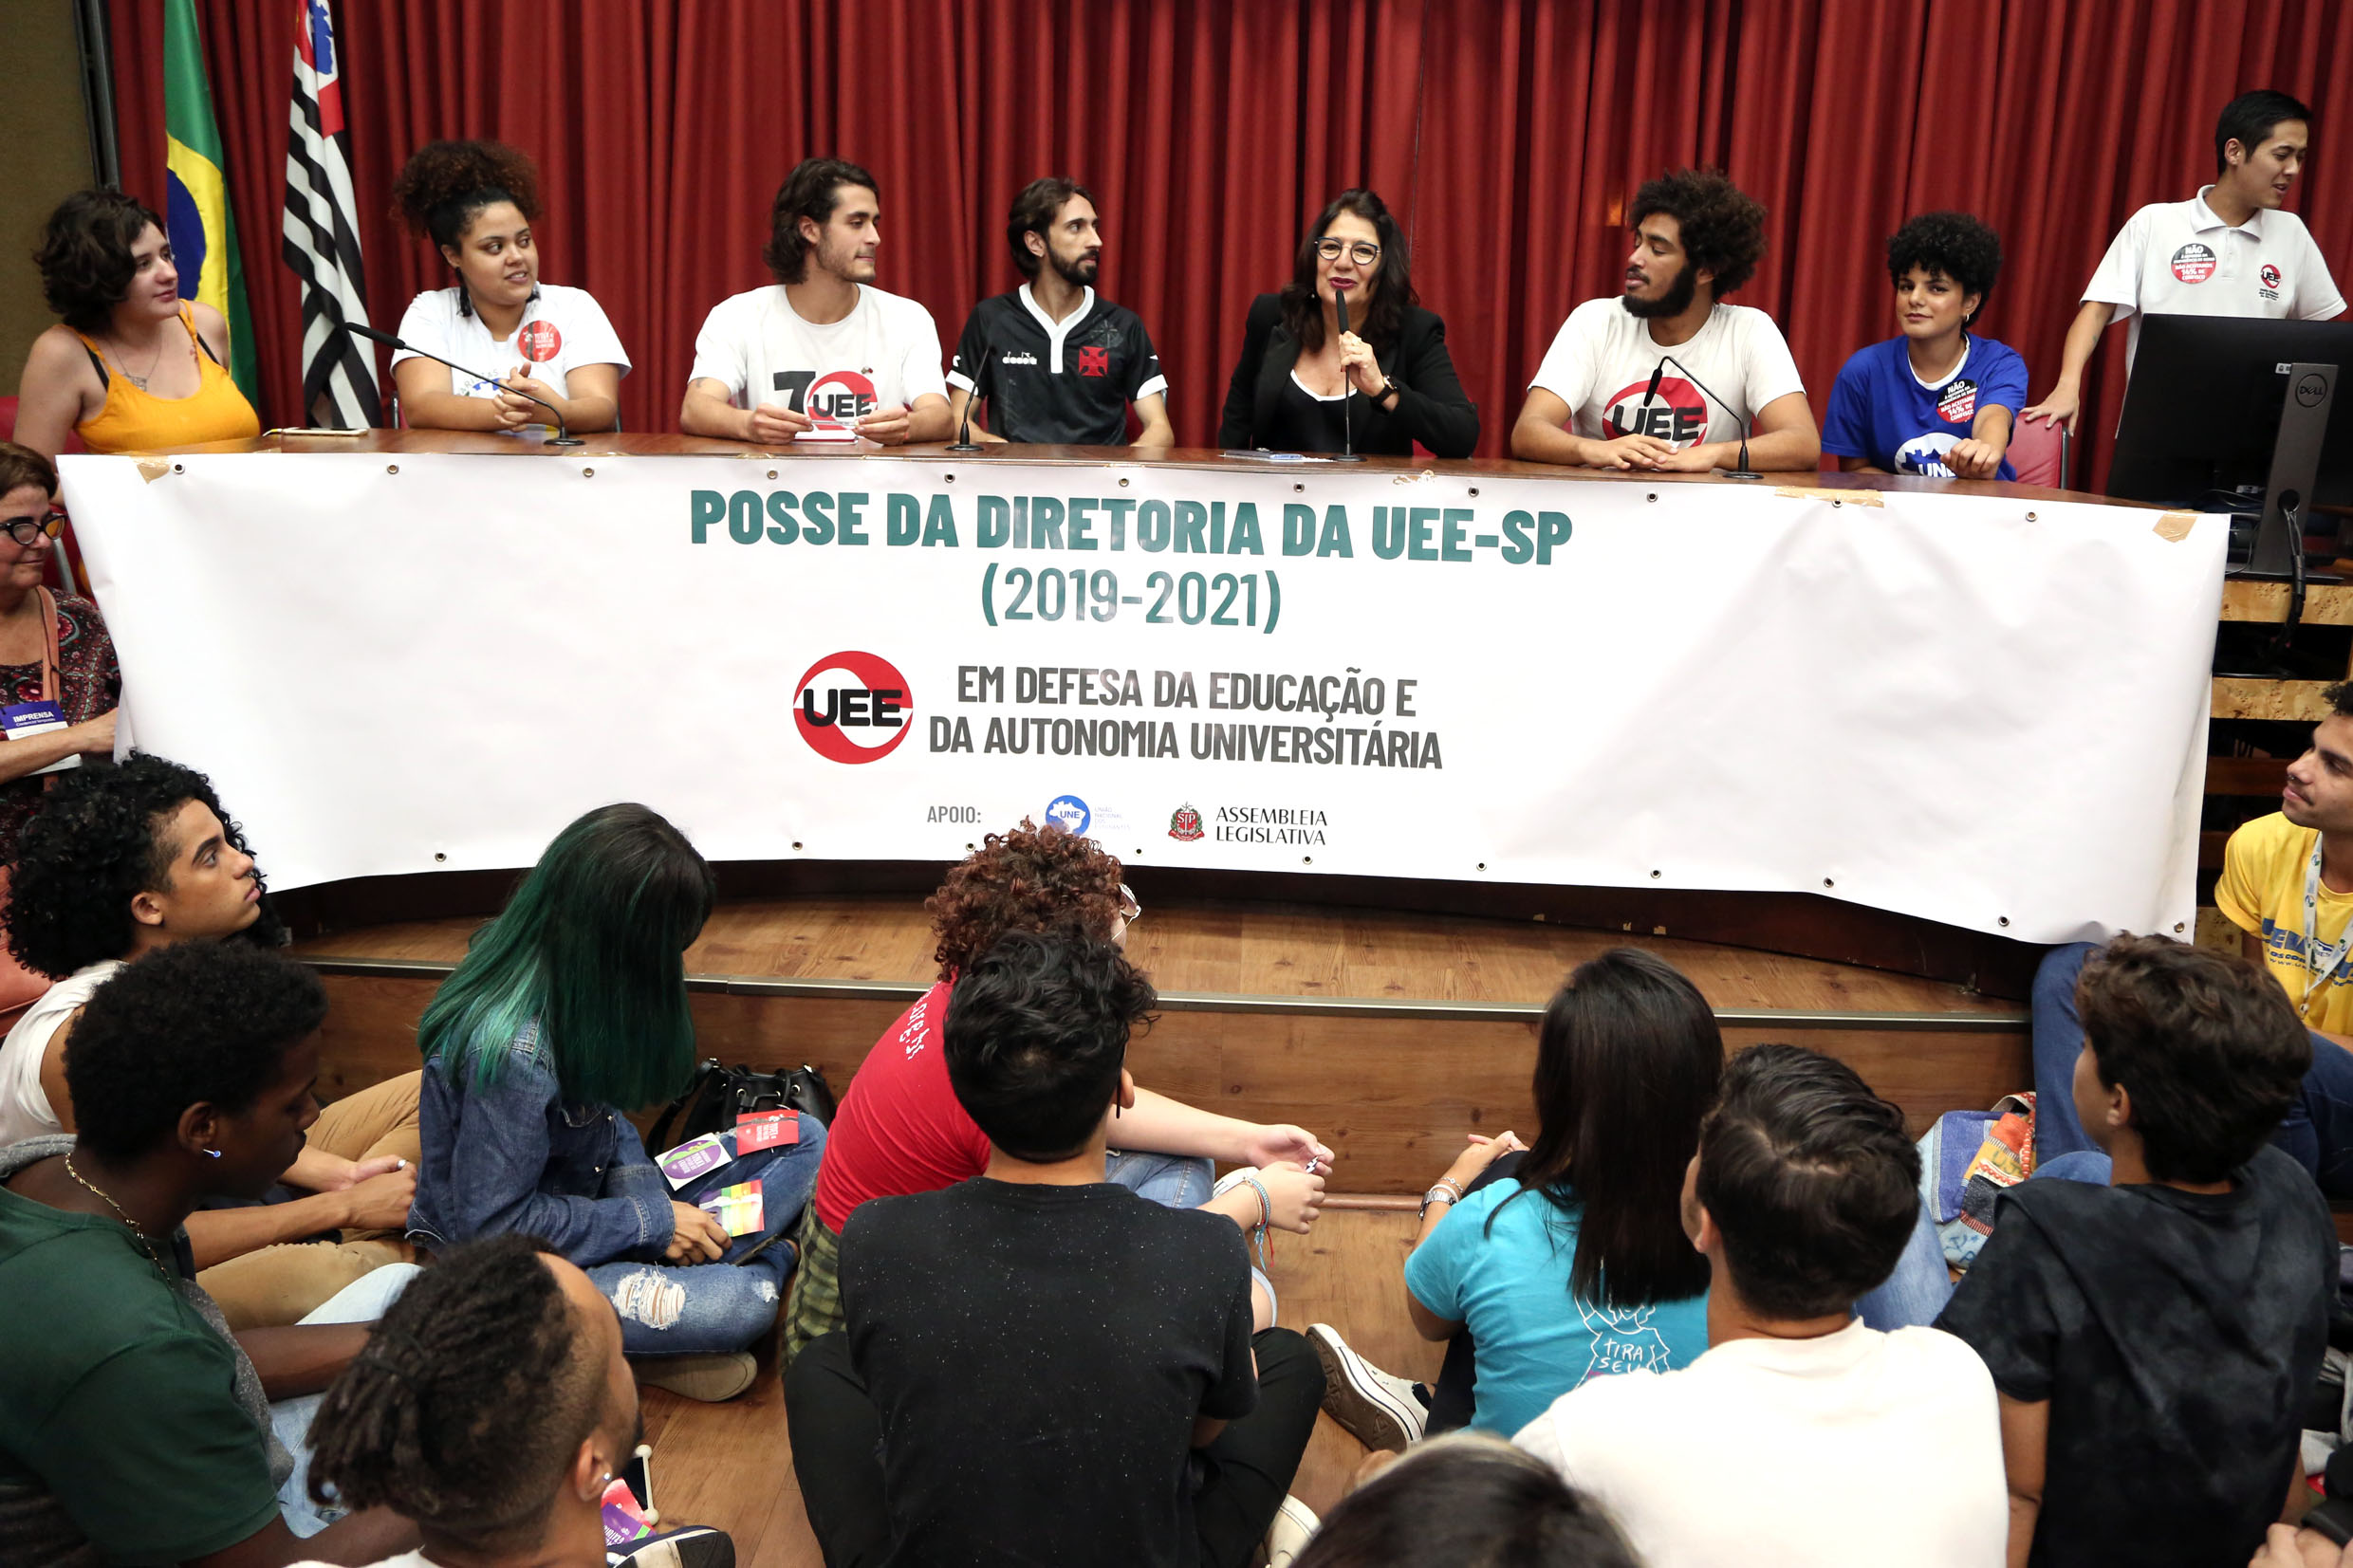 Mesa do evento <a style='float:right' href='https://www3.al.sp.gov.br/repositorio/noticia/N-12-2019/fg245368.jpg' target=_blank><img src='/_img/material-file-download-white.png' width='14px' alt='Clique para baixar a imagem'></a>